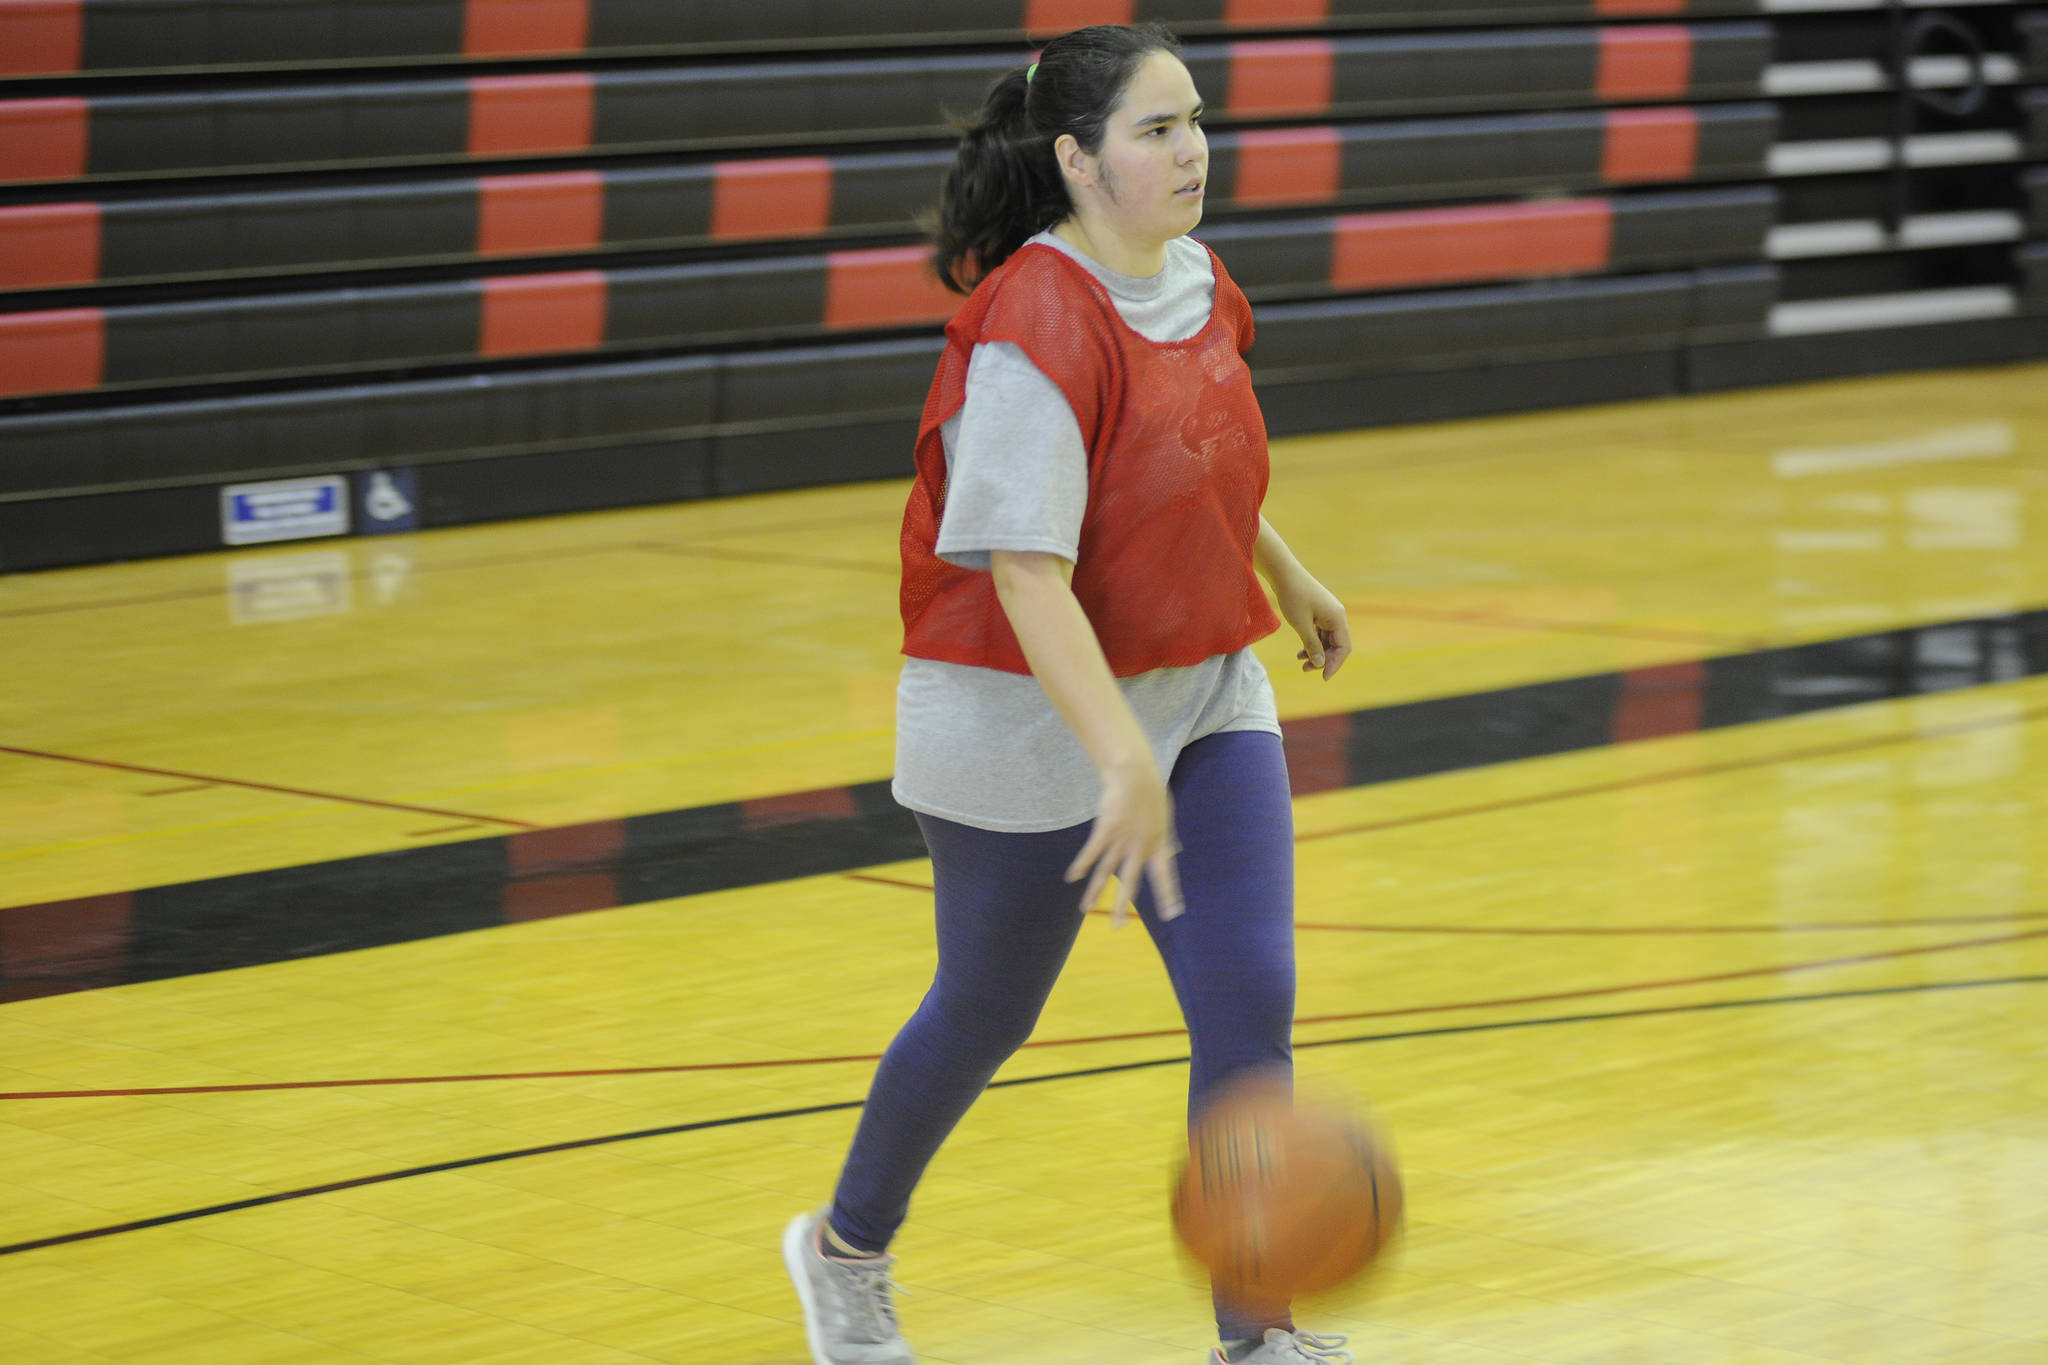 Kristina Brown brings the ball up the court during a scrimmage at the I Did You Can Basketball Camp on Saturday morning at Juneau-Douglas High School. (Nolin Ainsworth | Juneau Empire)